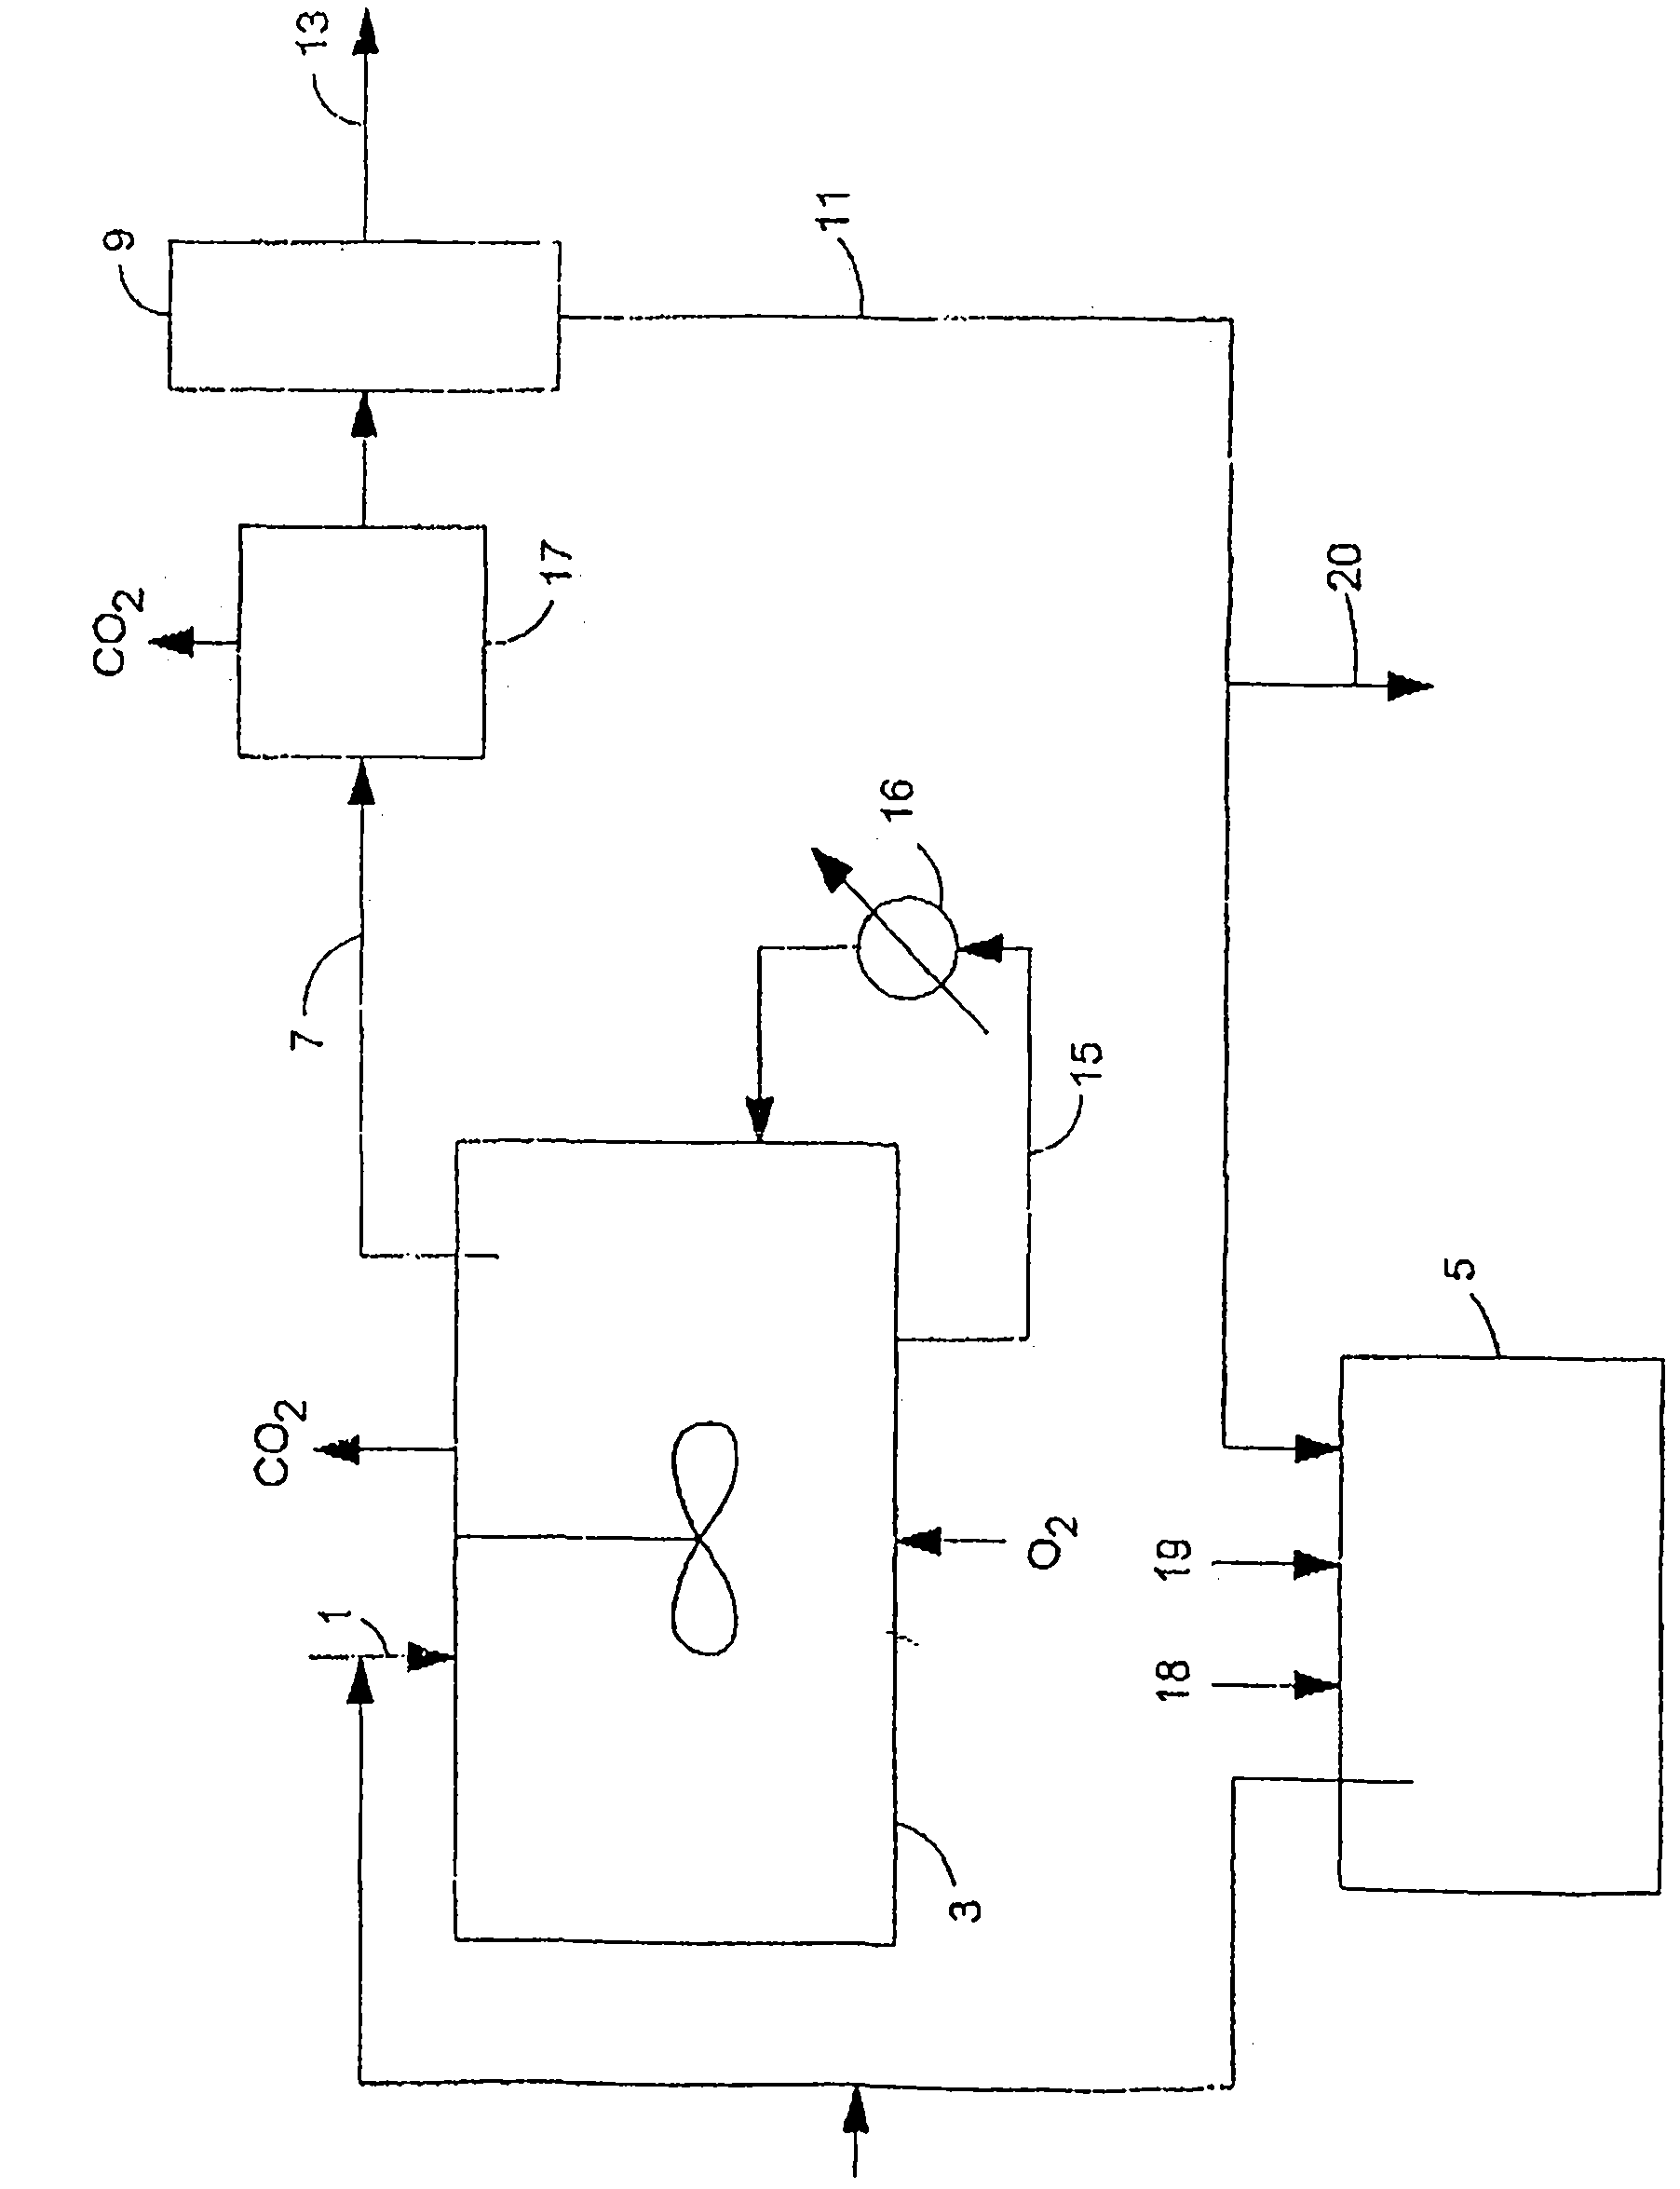 Reaction systems for making n-(phosphonomethyl)glycine compounds